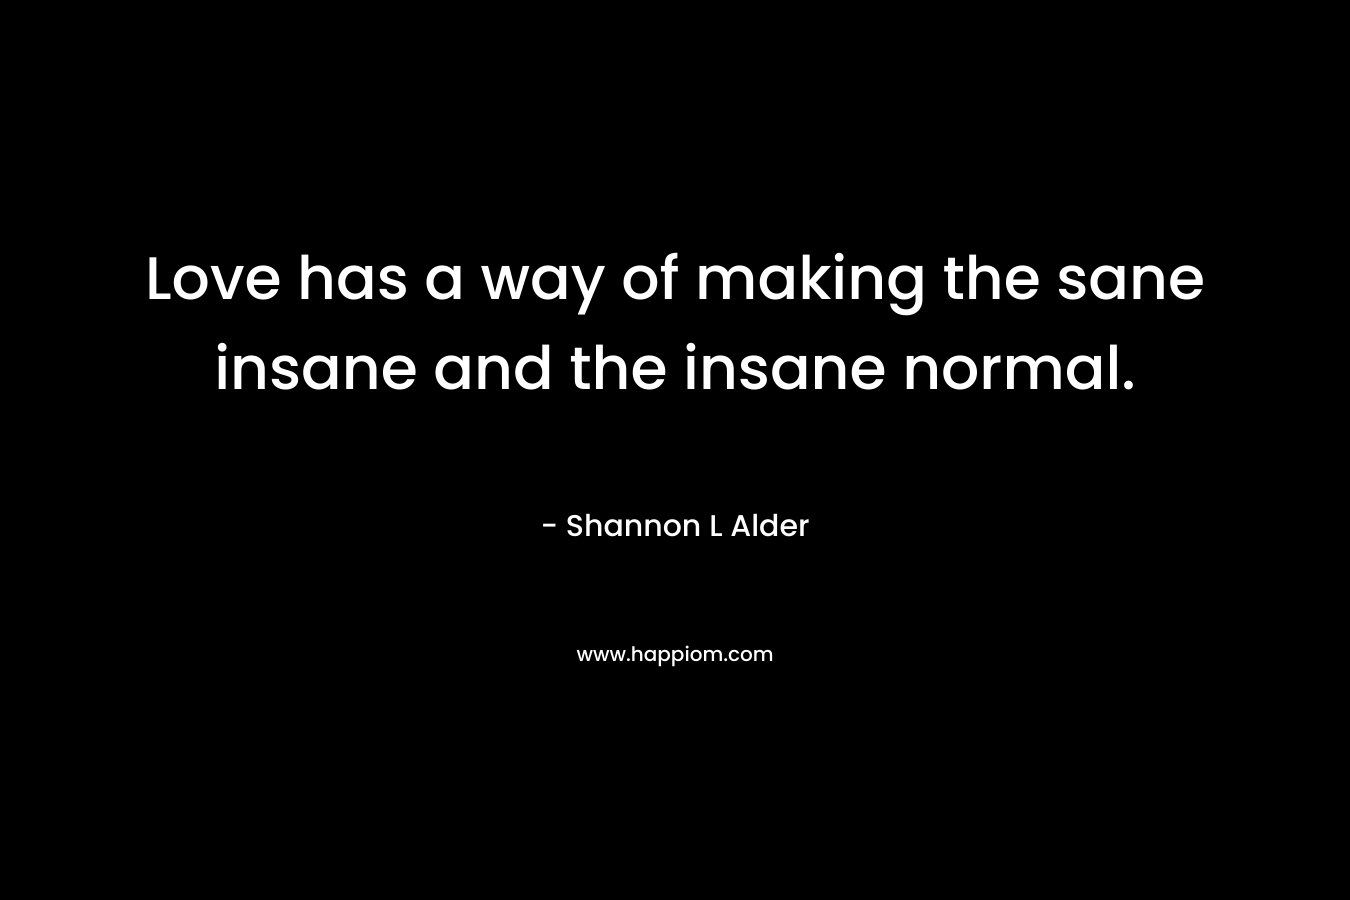 Love has a way of making the sane insane and the insane normal.